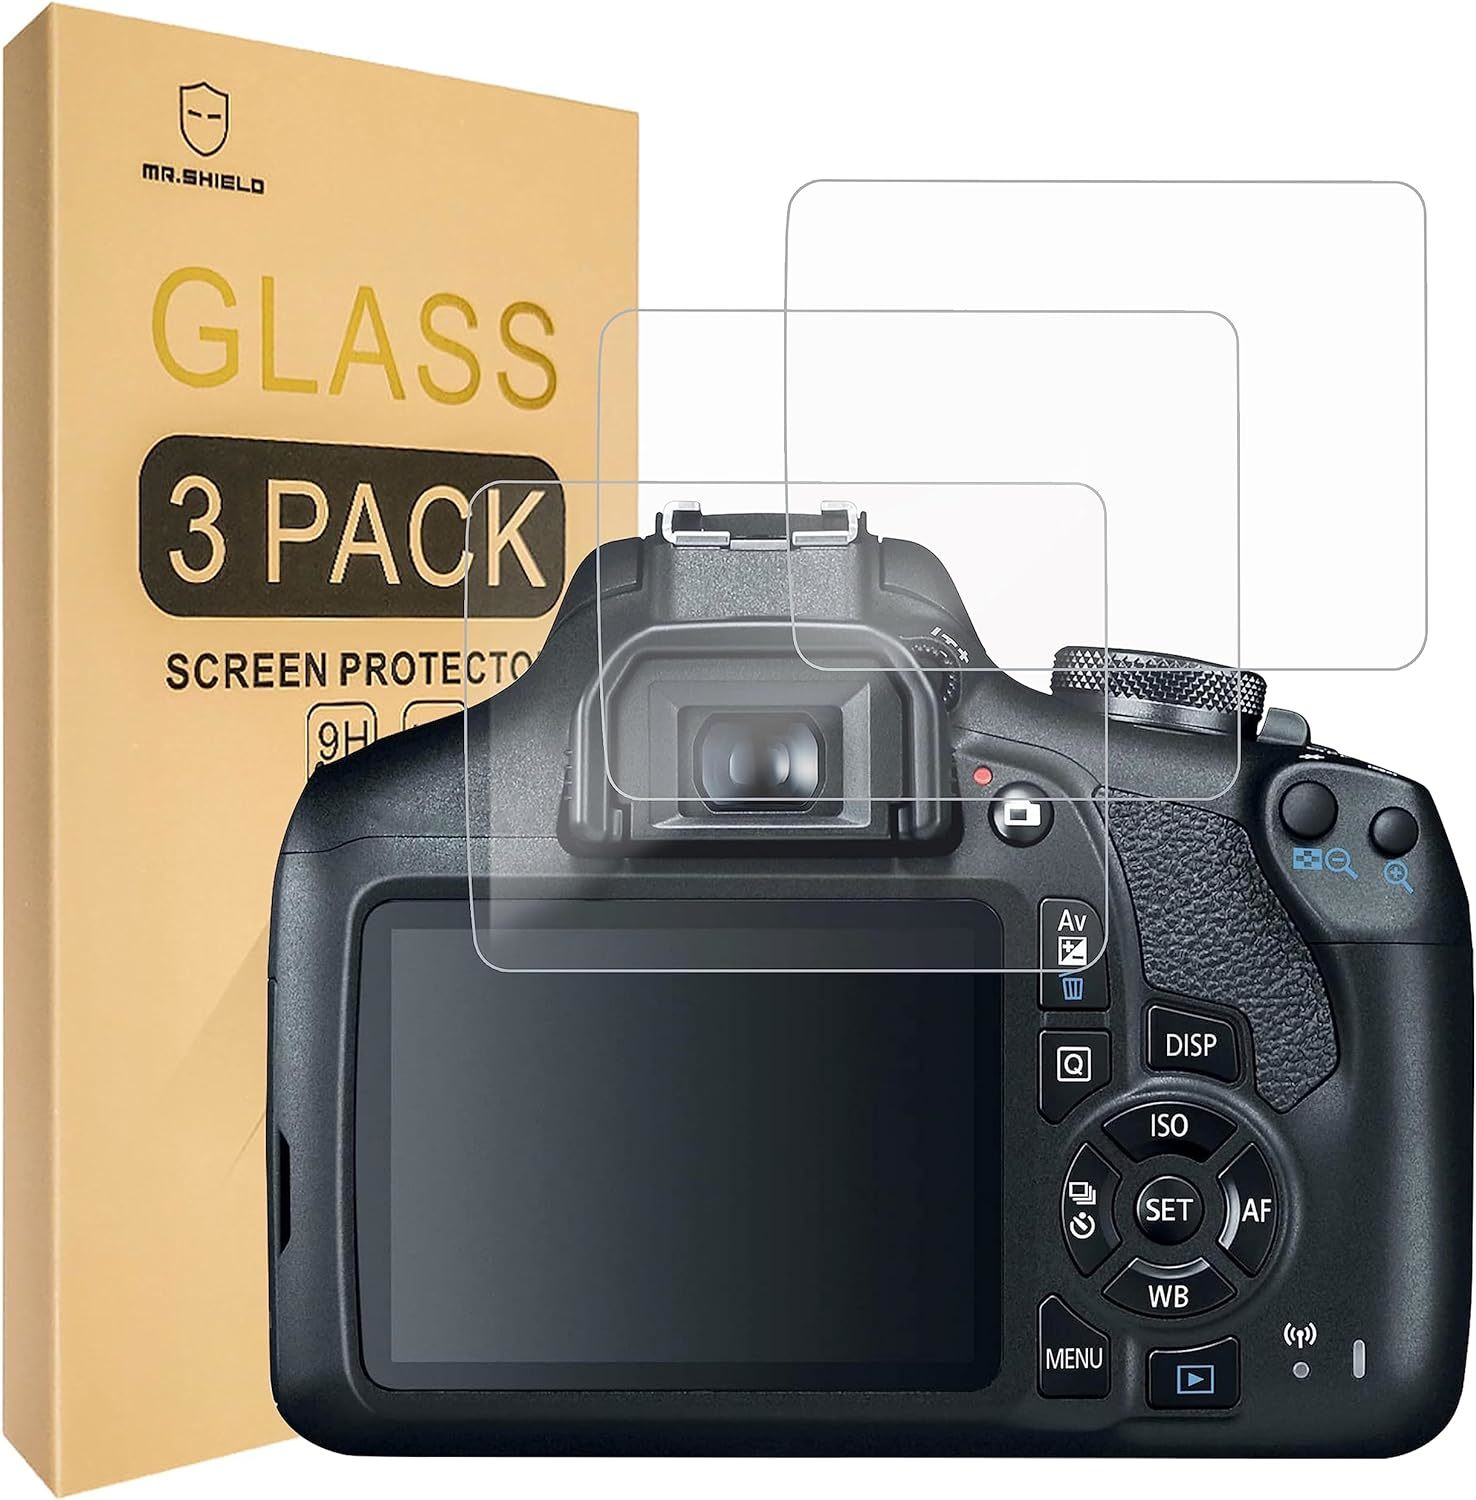  3 Pack Screen Protector For Canon EOS Rebel T7 T6 T5 2000d 1300d 1200d - $20.89